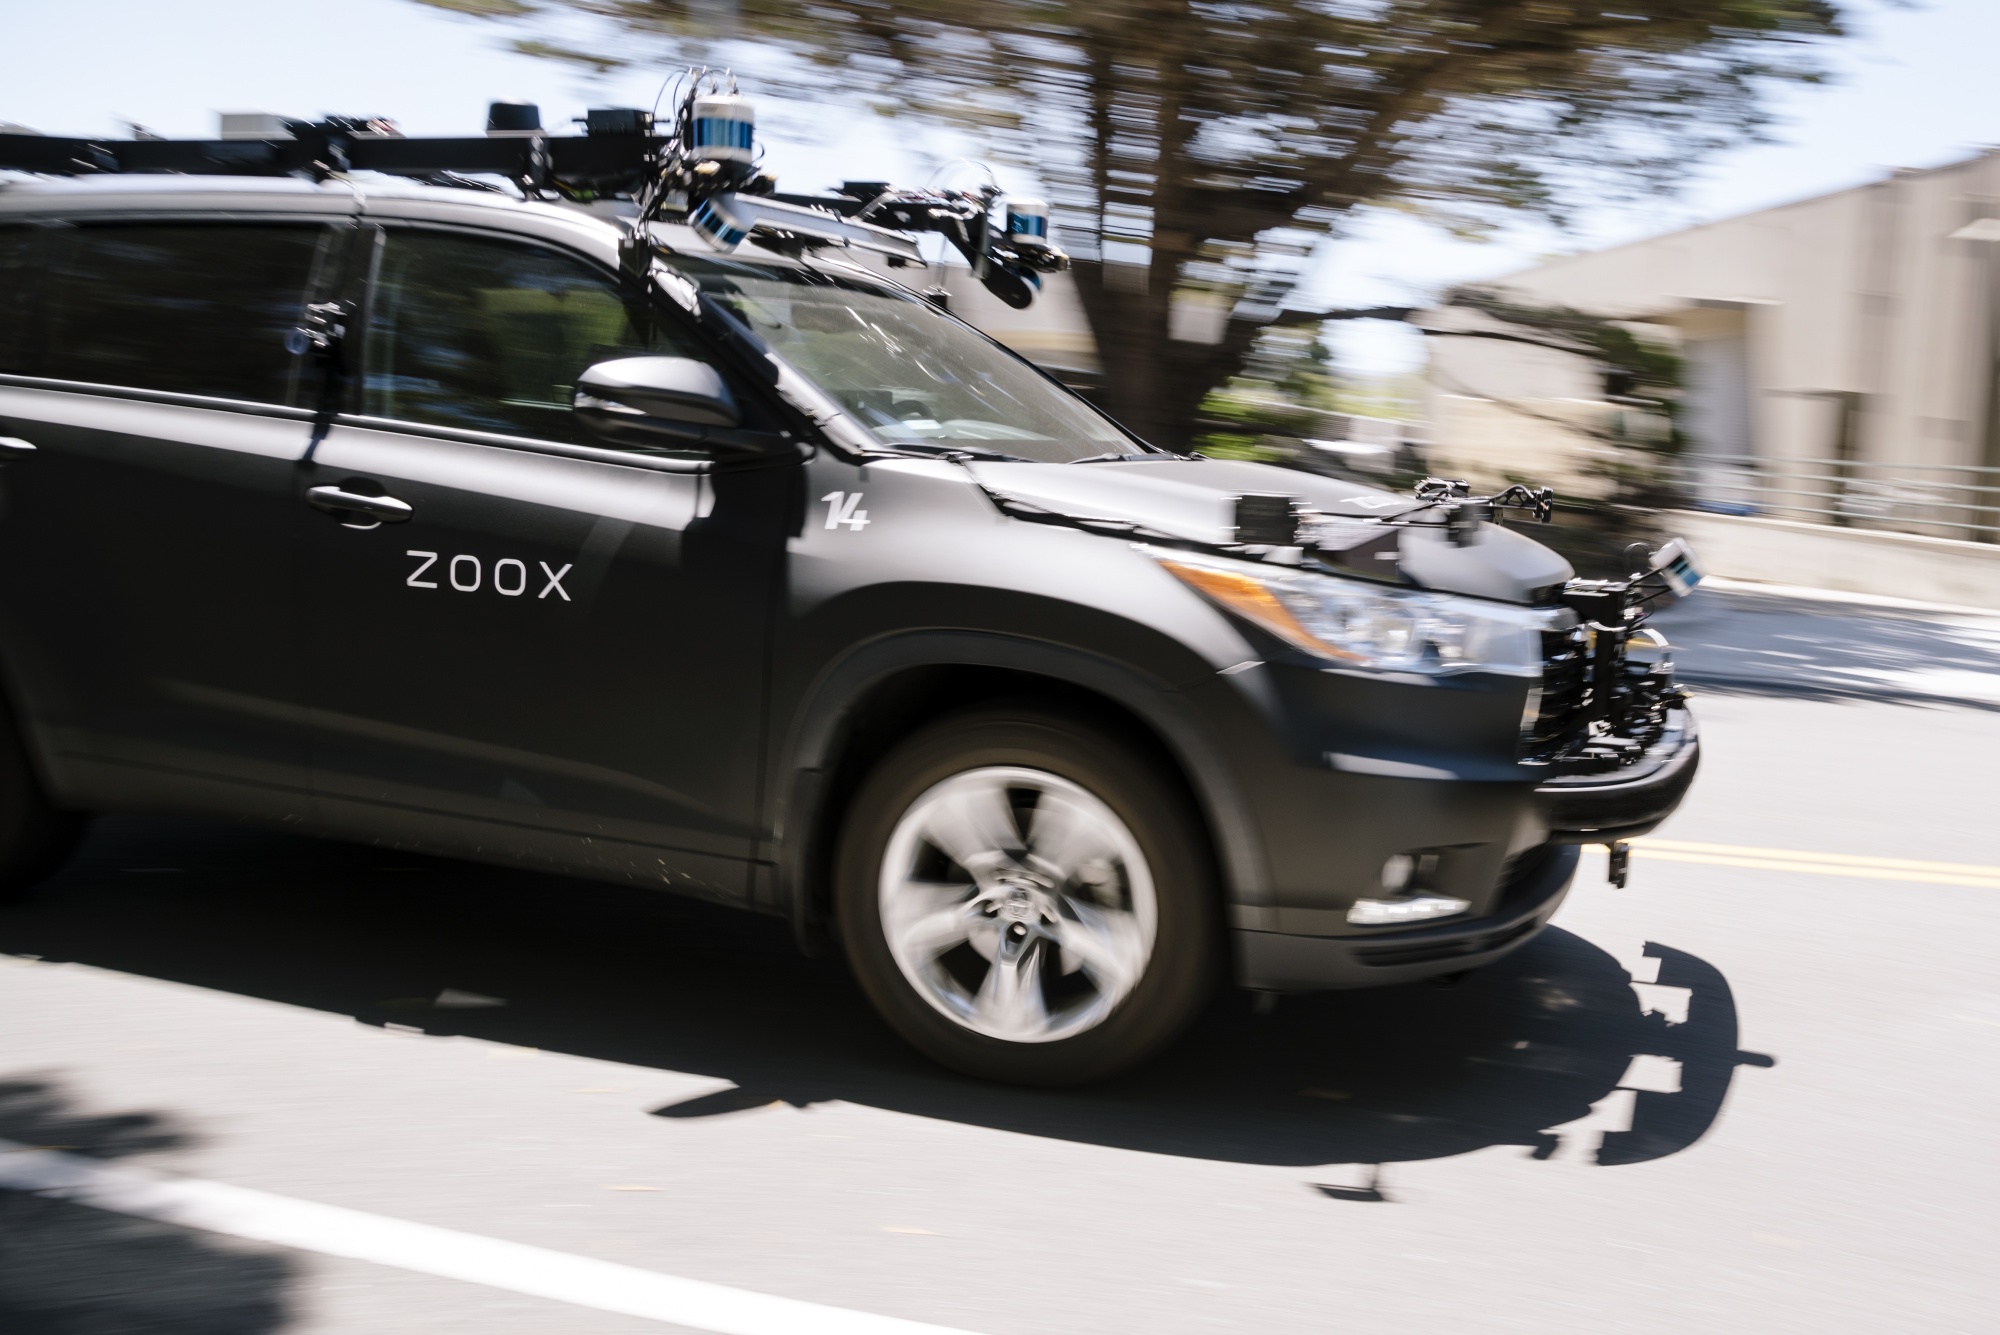 A Zoox self-driving car is operated outside the company's headquarters in Foster City, California.